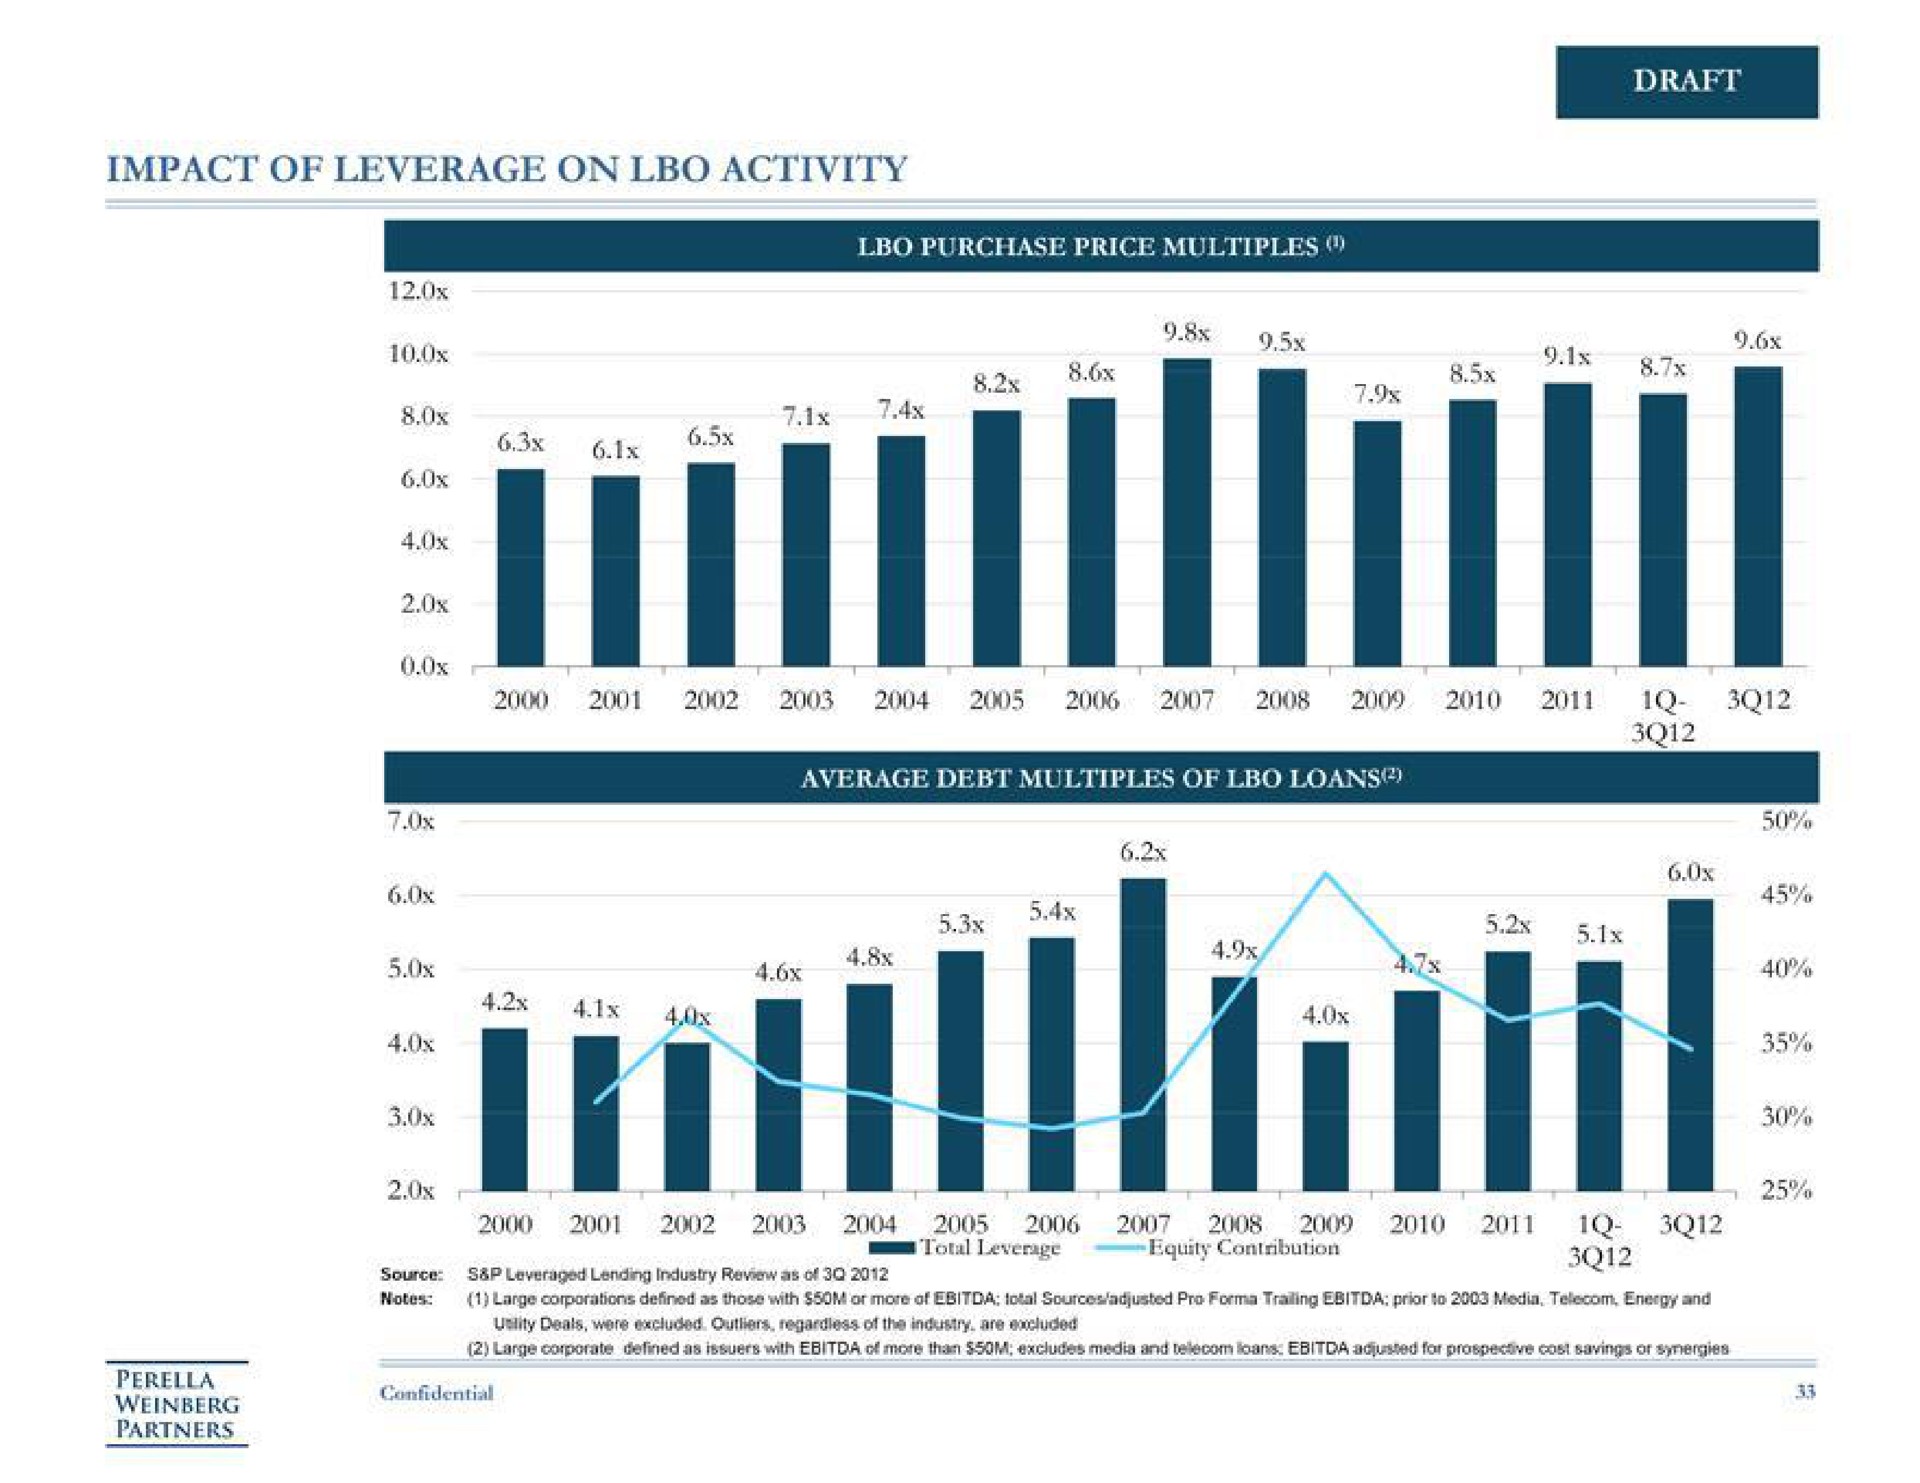 impact of leverage on activity draft average debt multiples of loans | Perella Weinberg Partners